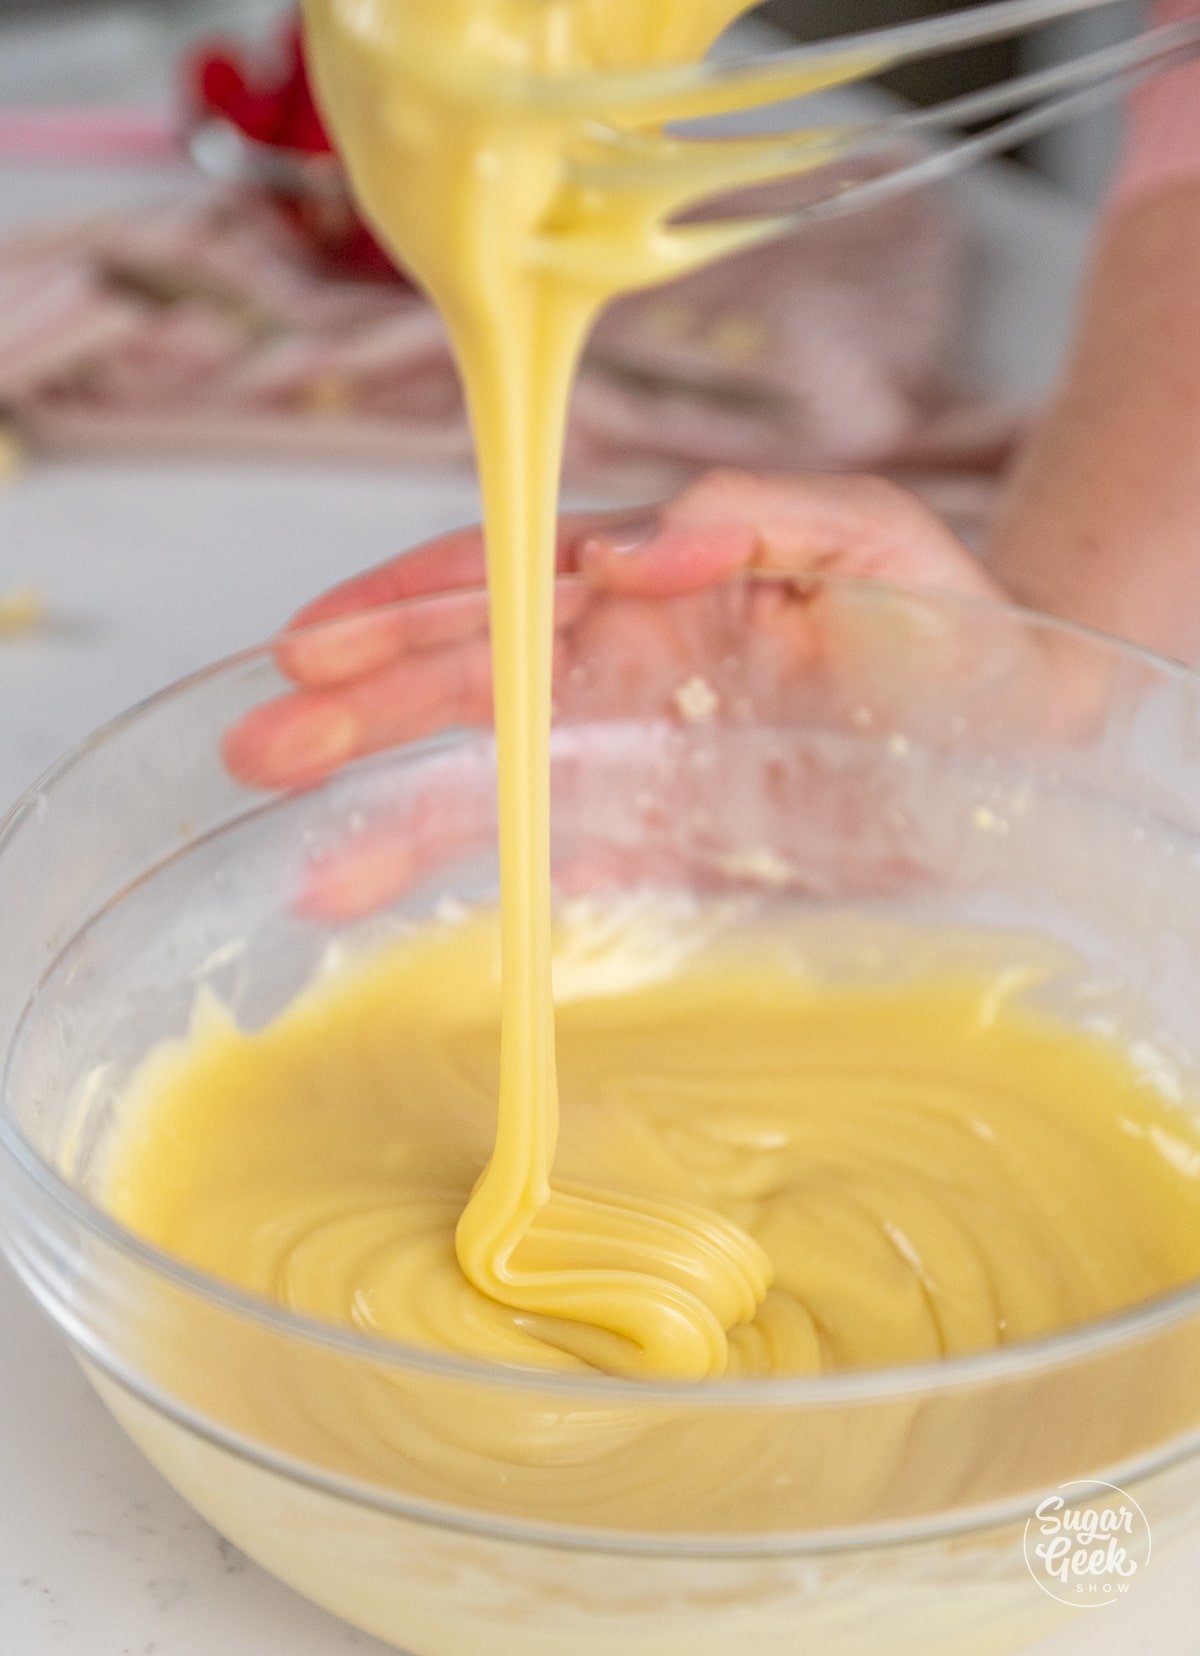 Whisk drizzling white chocolate ganache in a bowl.